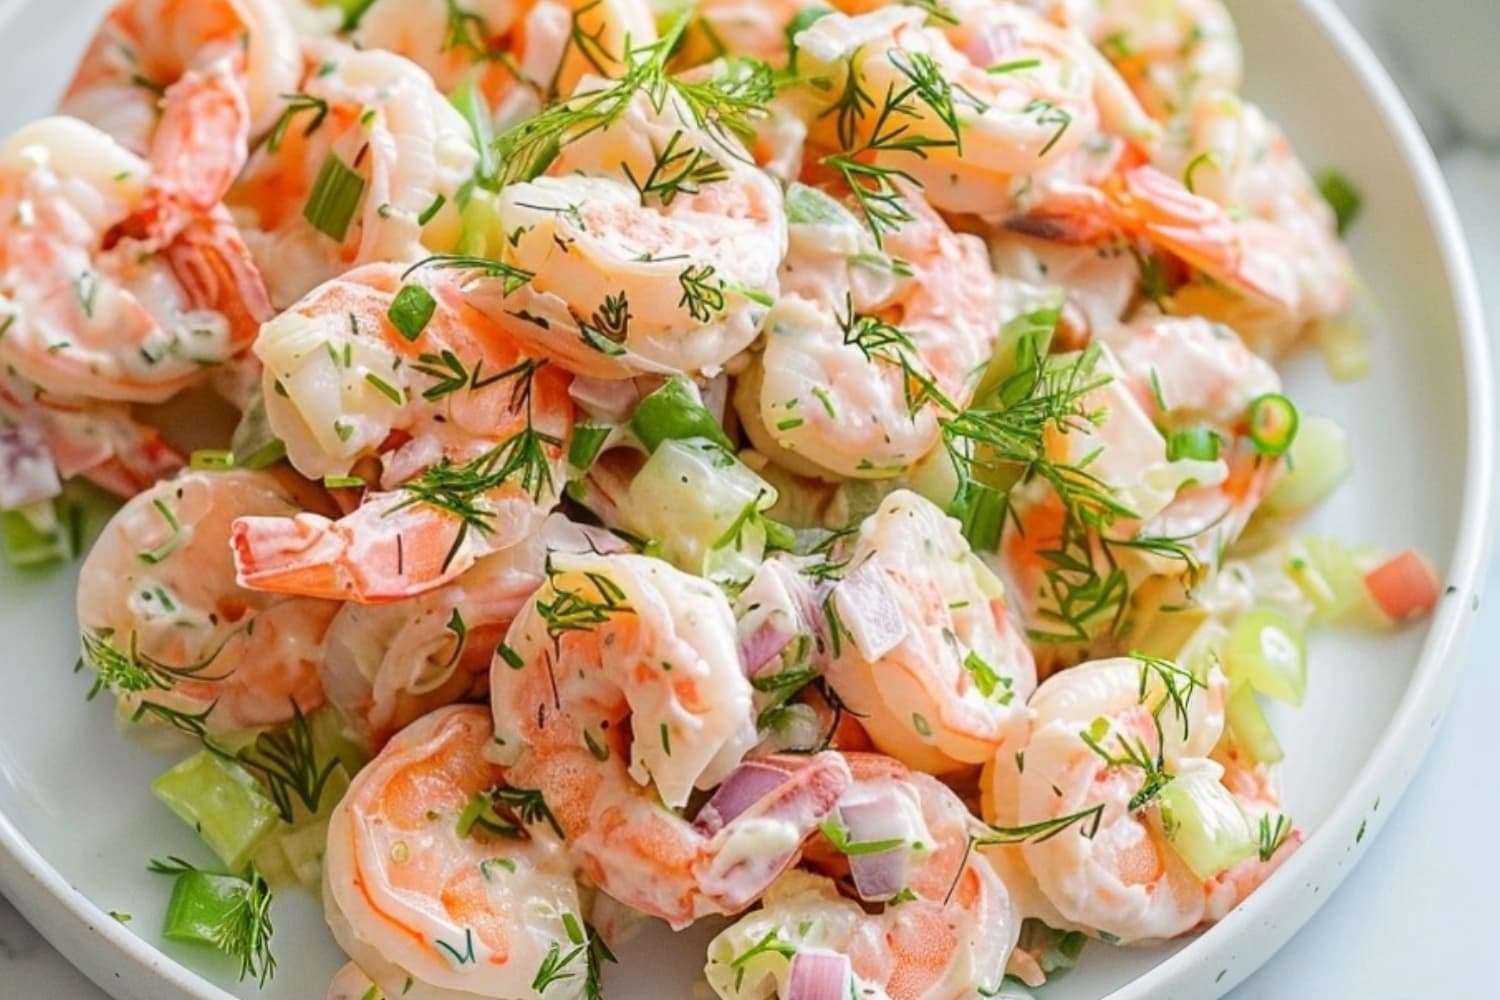 Shrimp salad with mayonnaise dressing, celery, dill and onions served on a white plate.